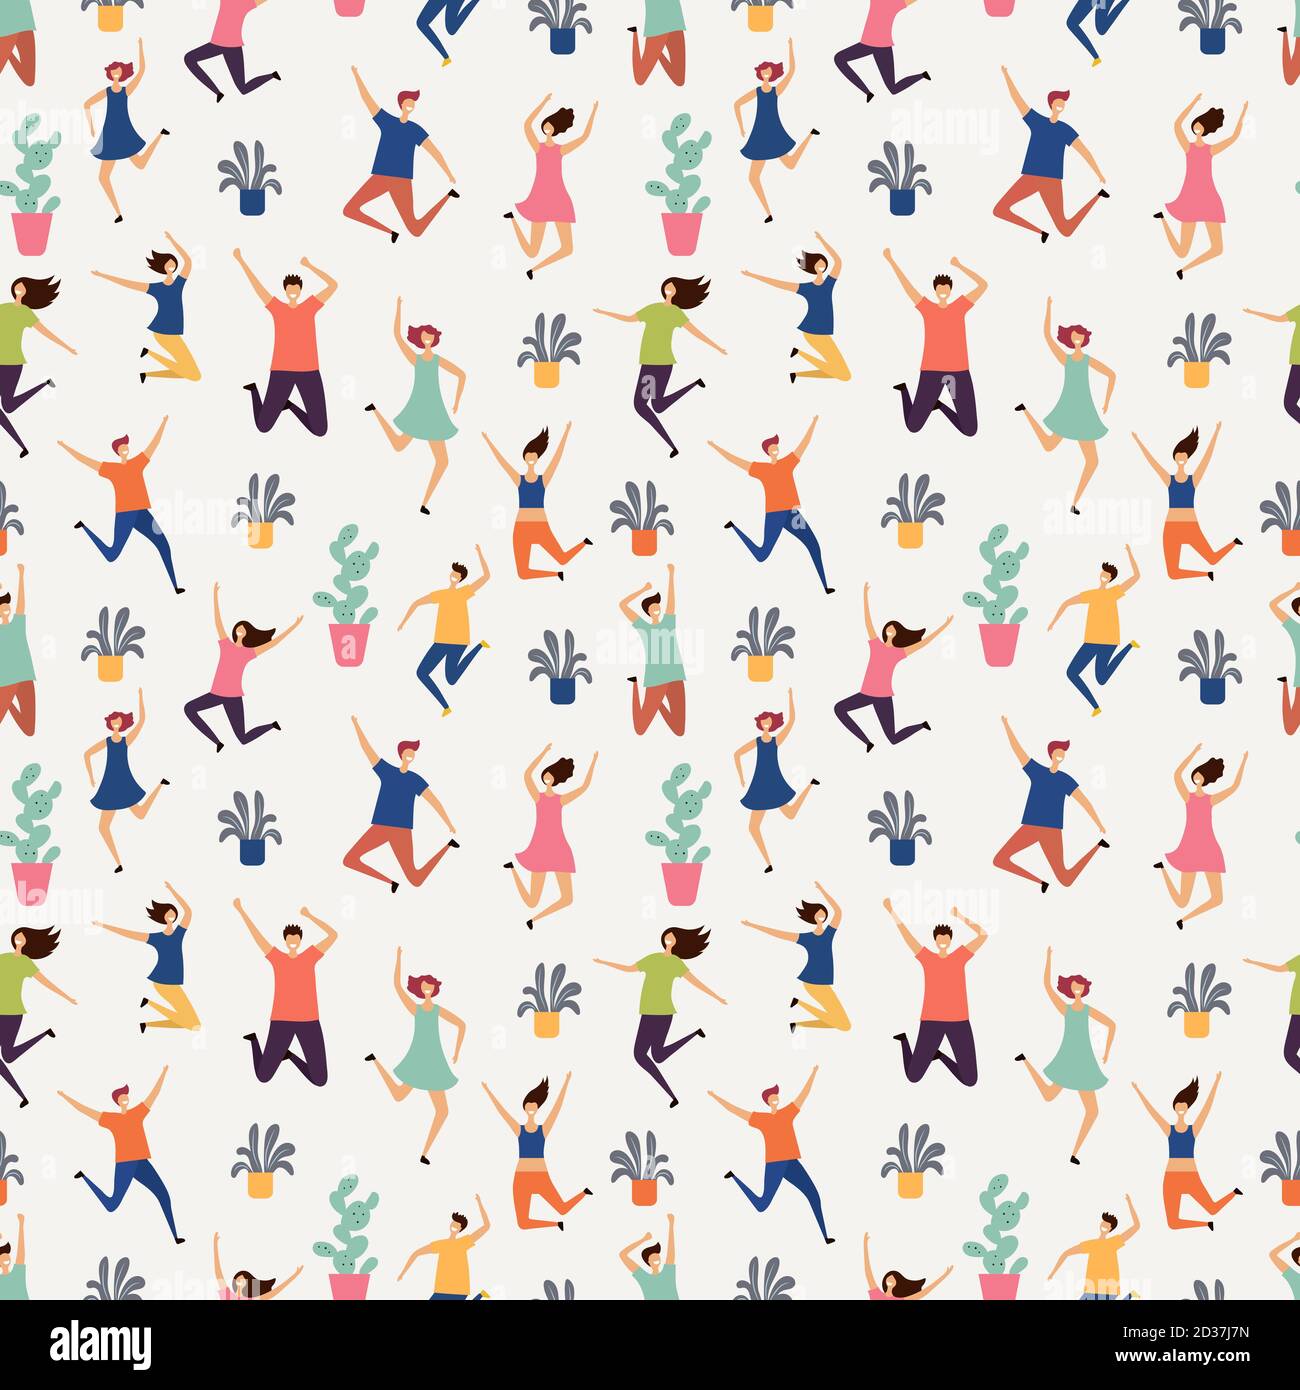 Jumping and flying people seamless pattern. Plants and happy humans vector texture Stock Vector